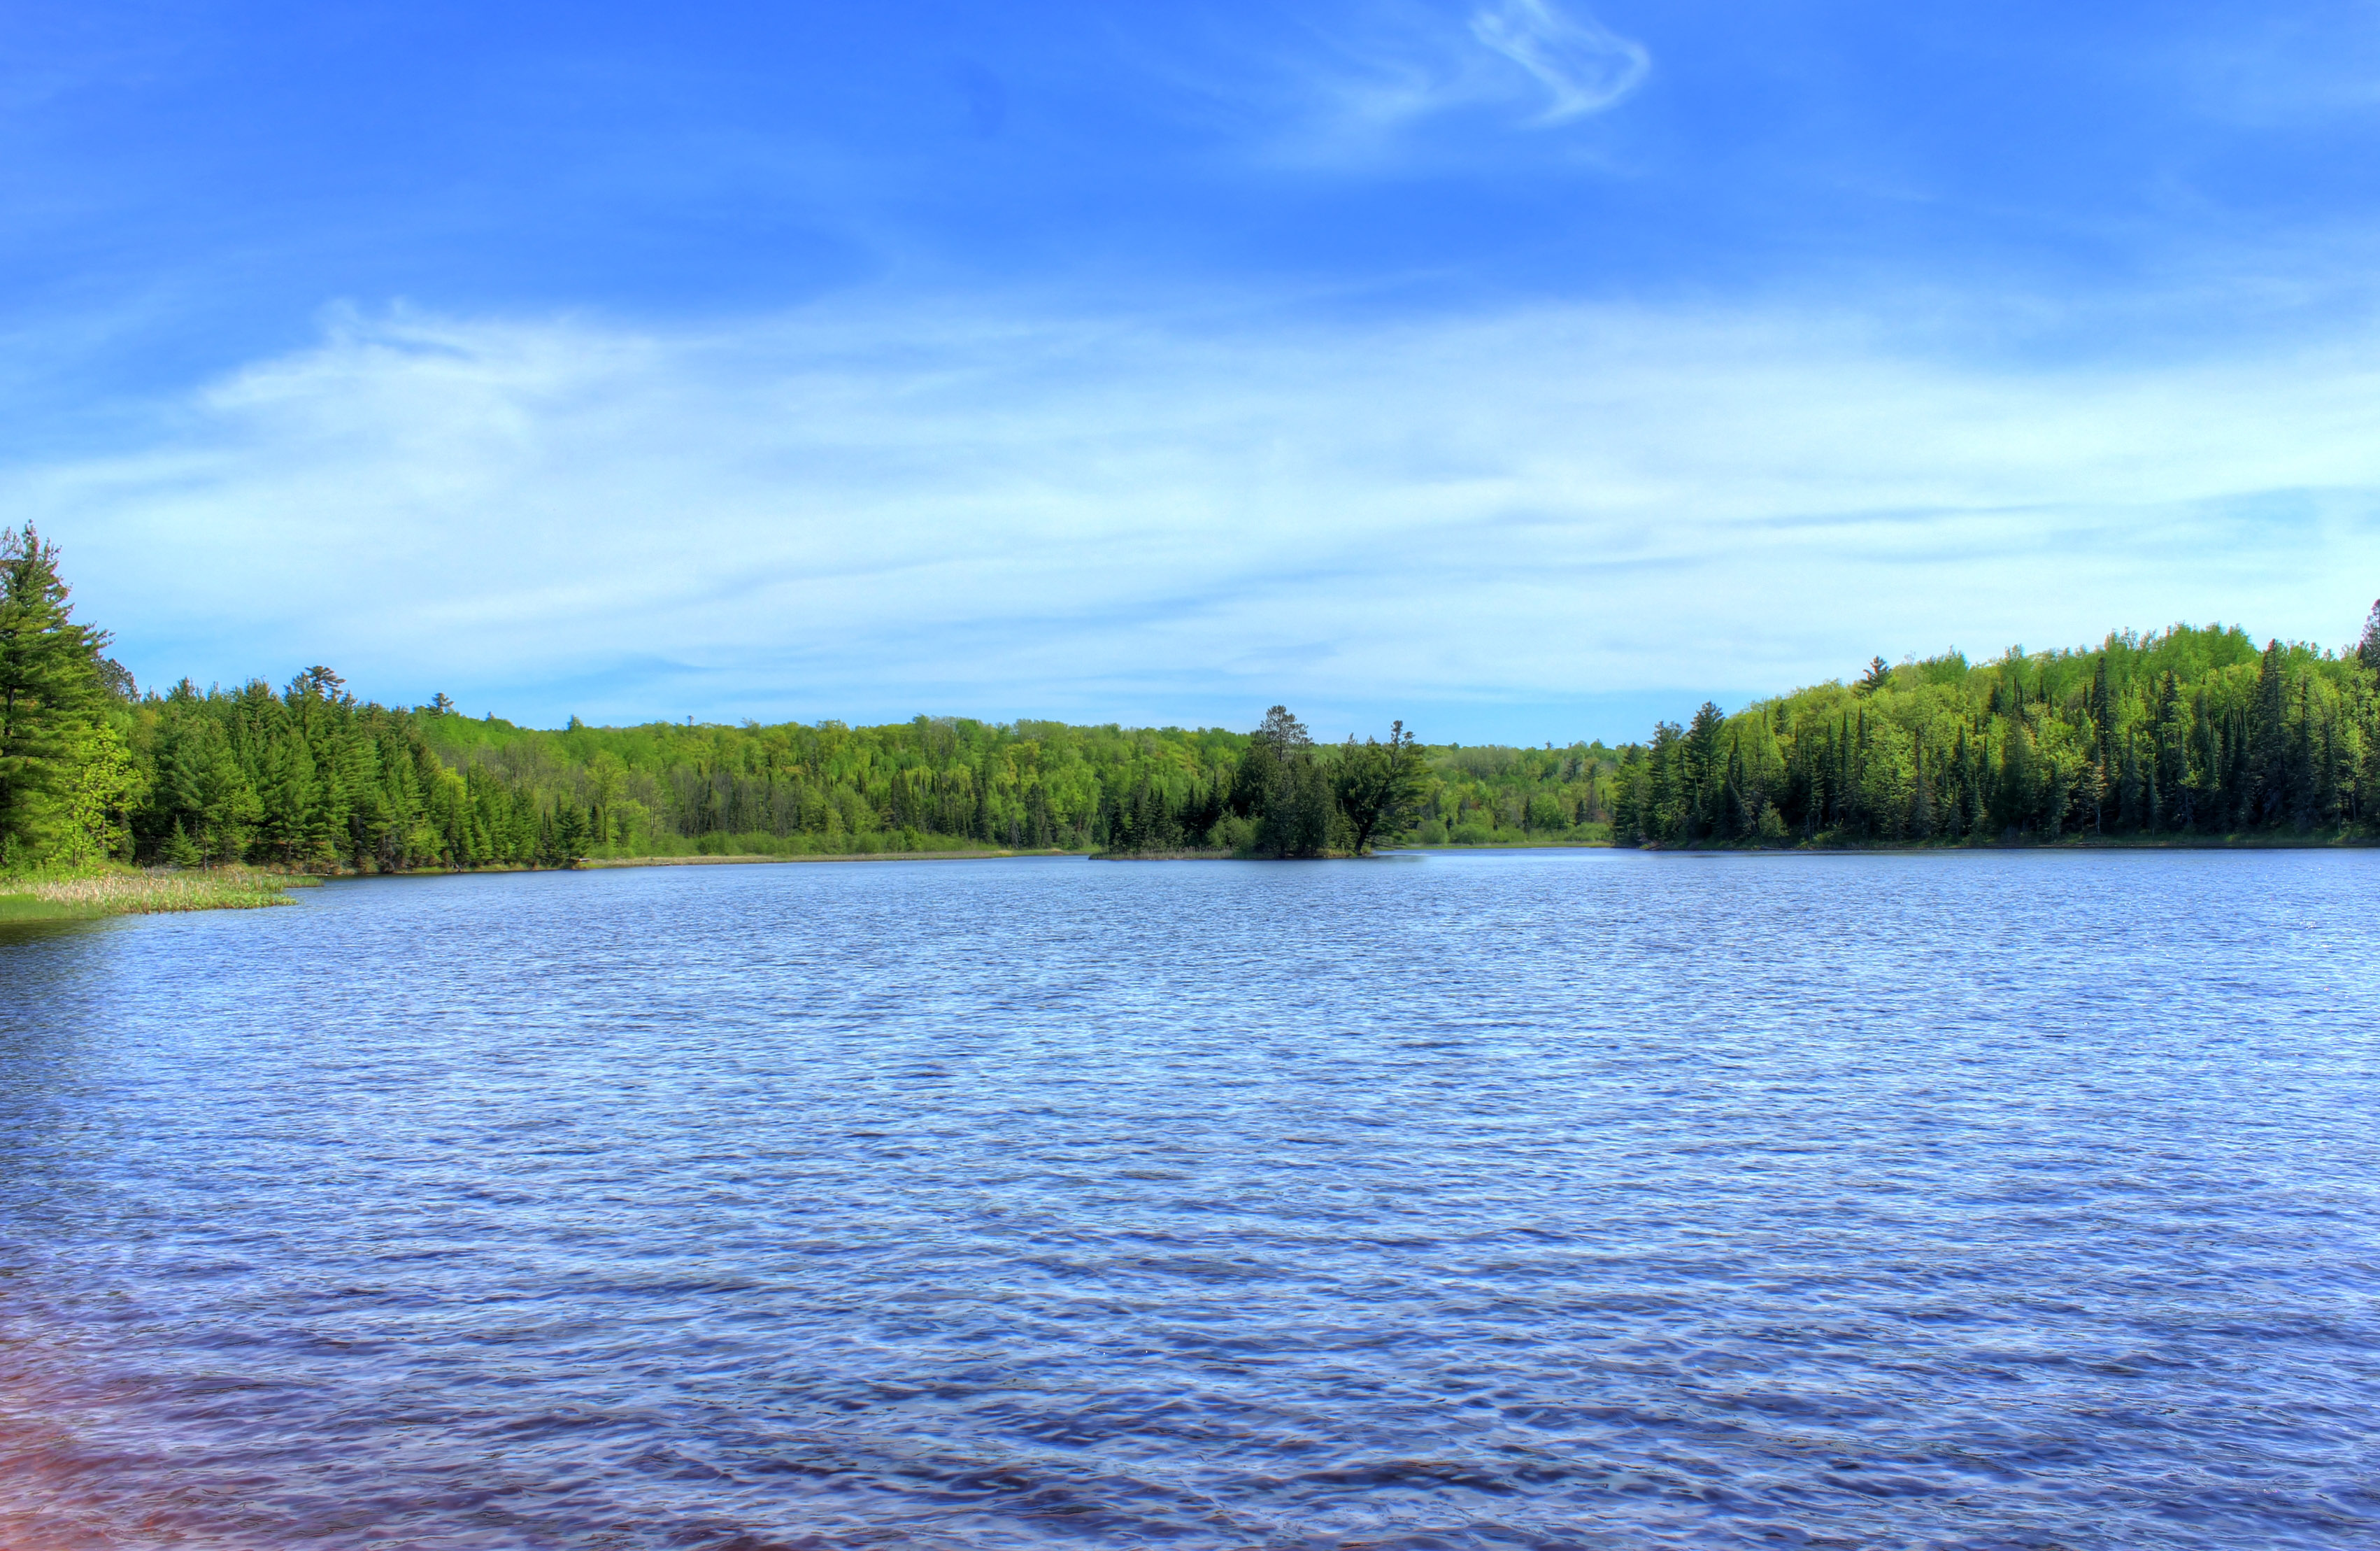 Lake and Sky at Pattison State Park, Wisconsin image - Free stock ...